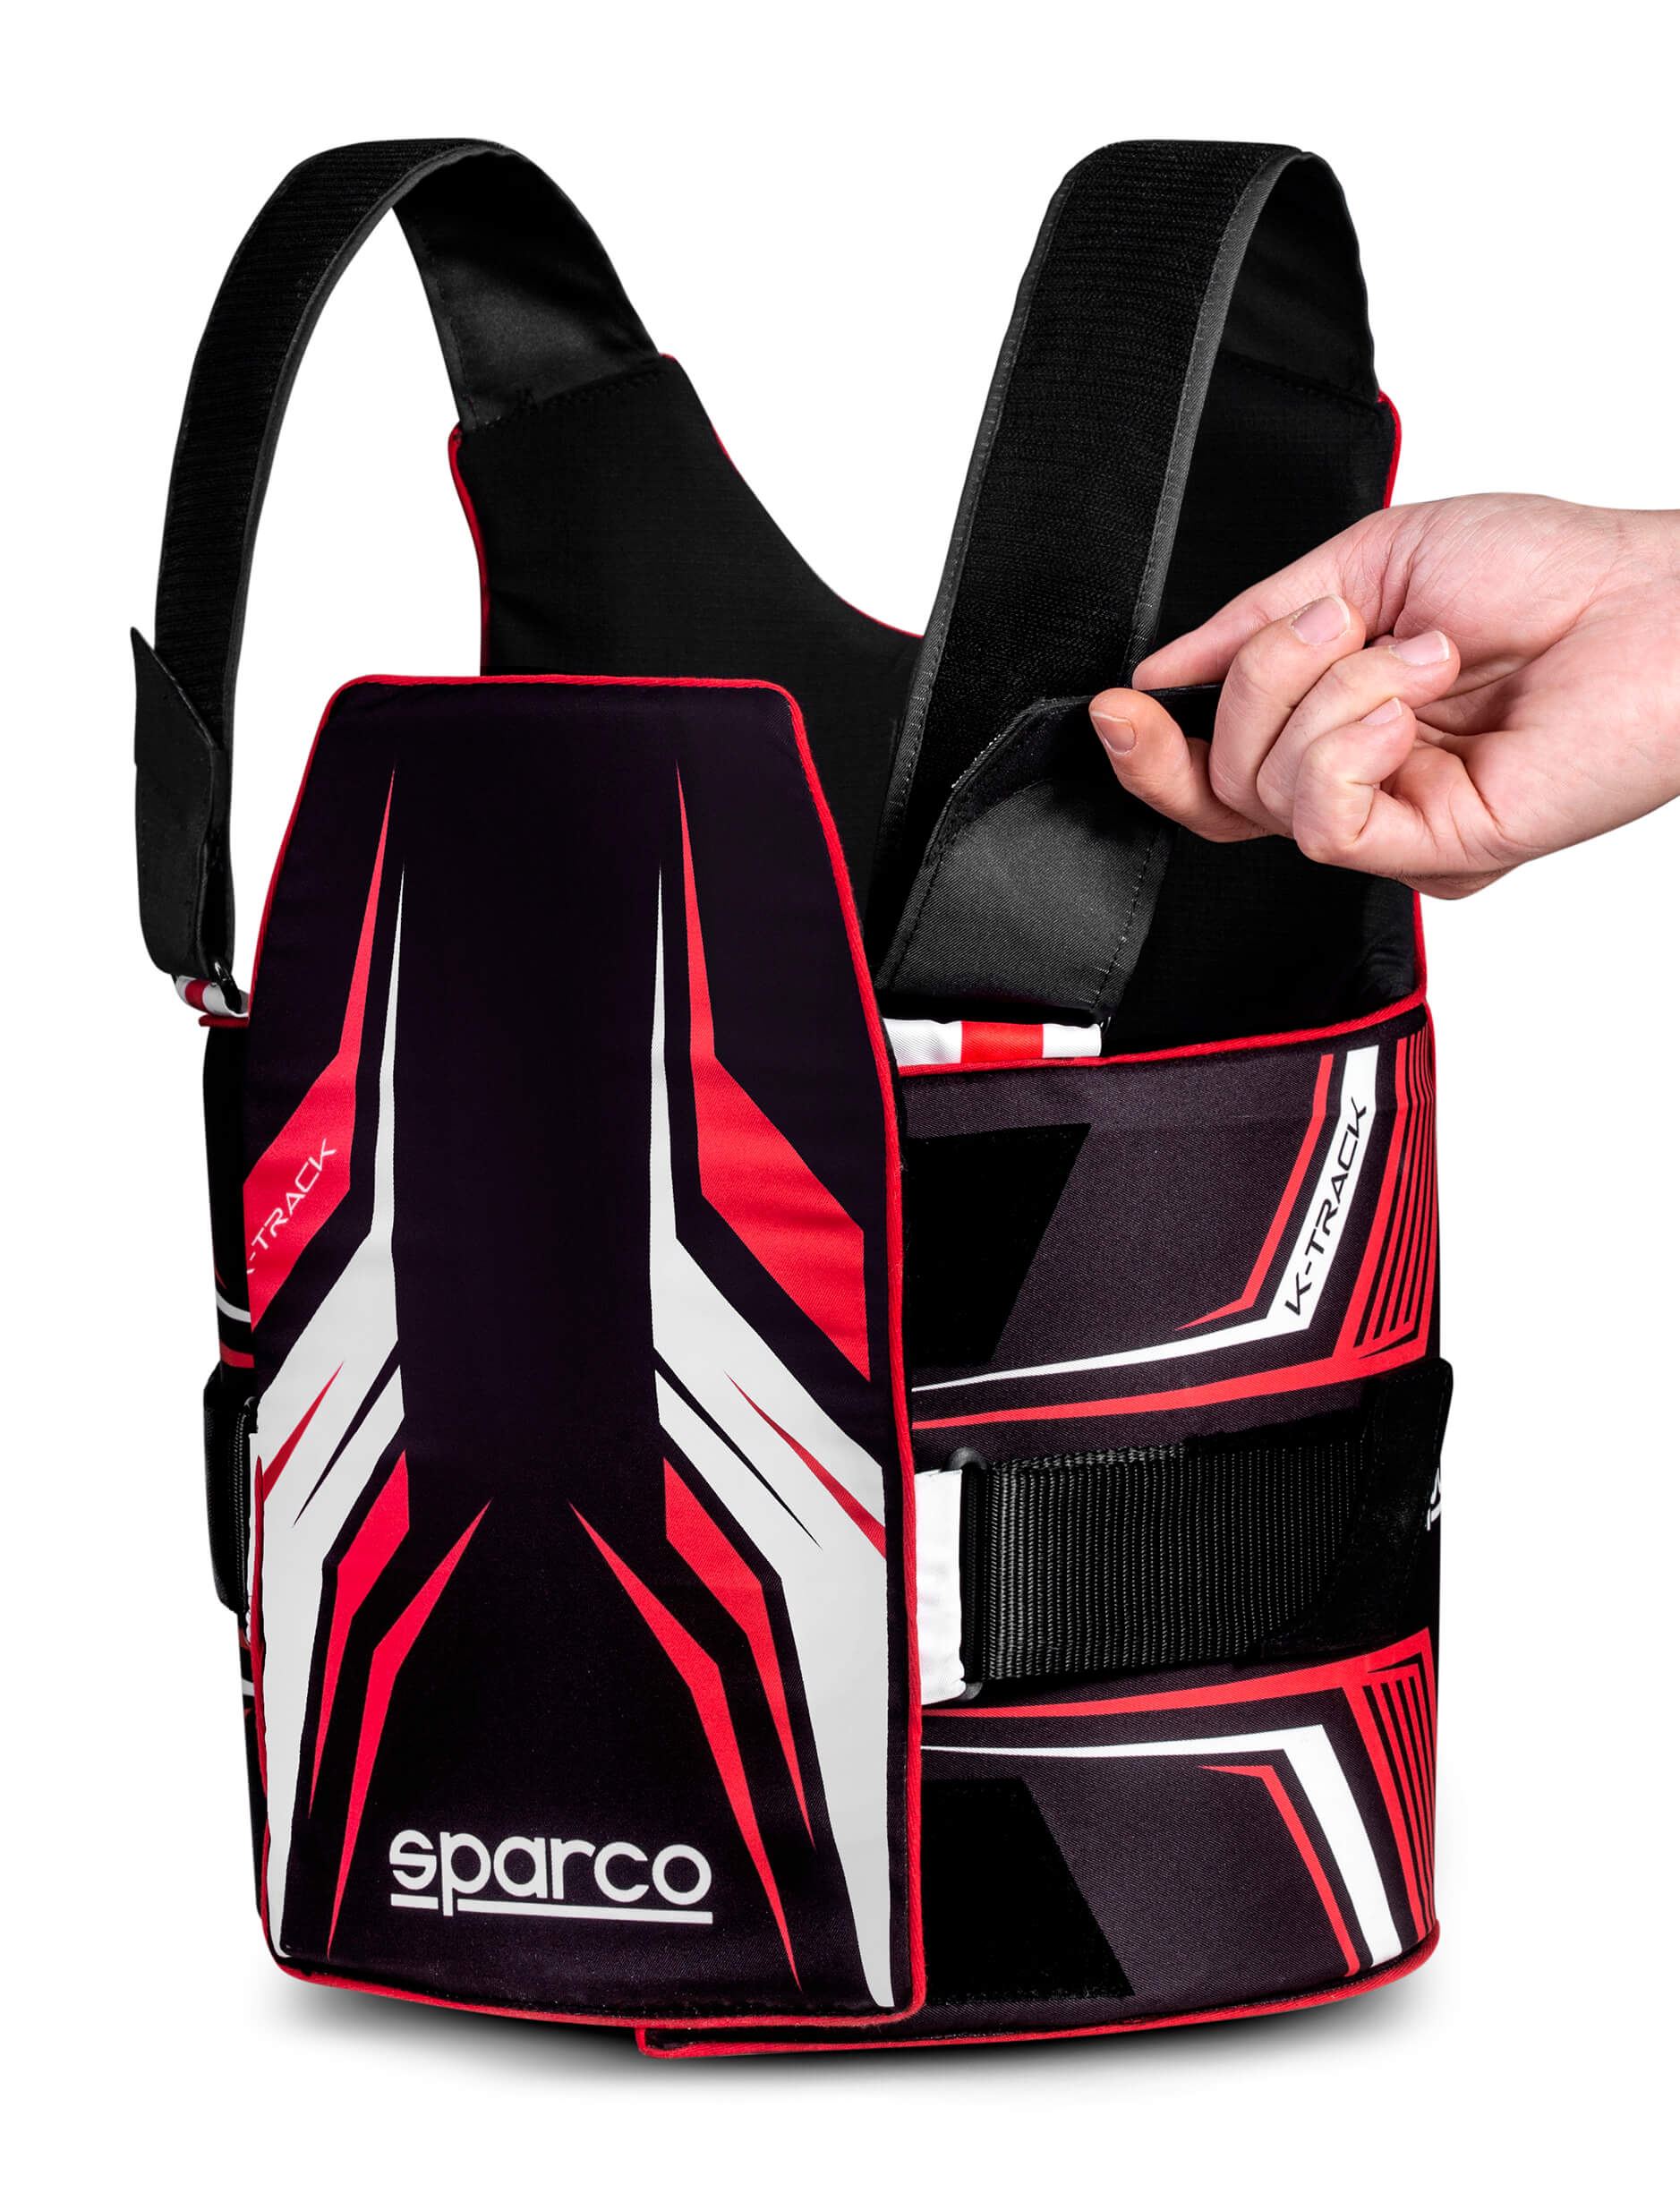 SPARCO 002406KNRRS2S K-TRACK Karting Rib Protector, FIA 8870-2018, black/red, size S Photo-3 